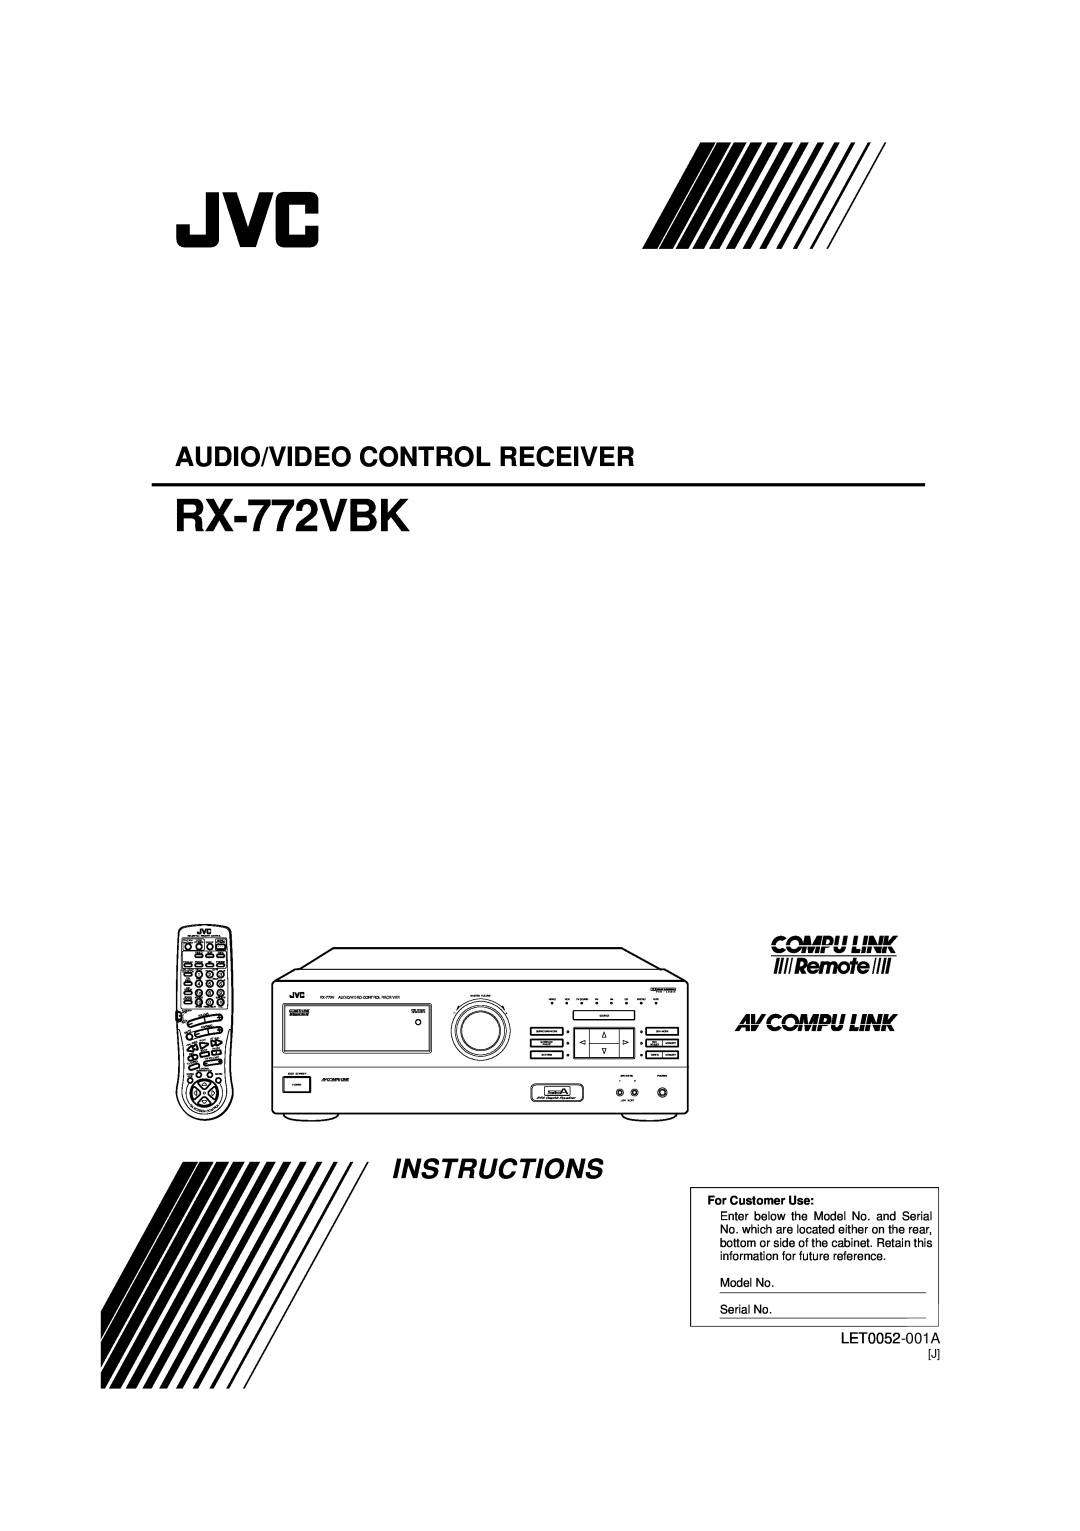 JVC RX-772VBK manual Audio/Video Control Receiver, Instructions, LET0052-001A, For Customer Use, Model No Serial No 